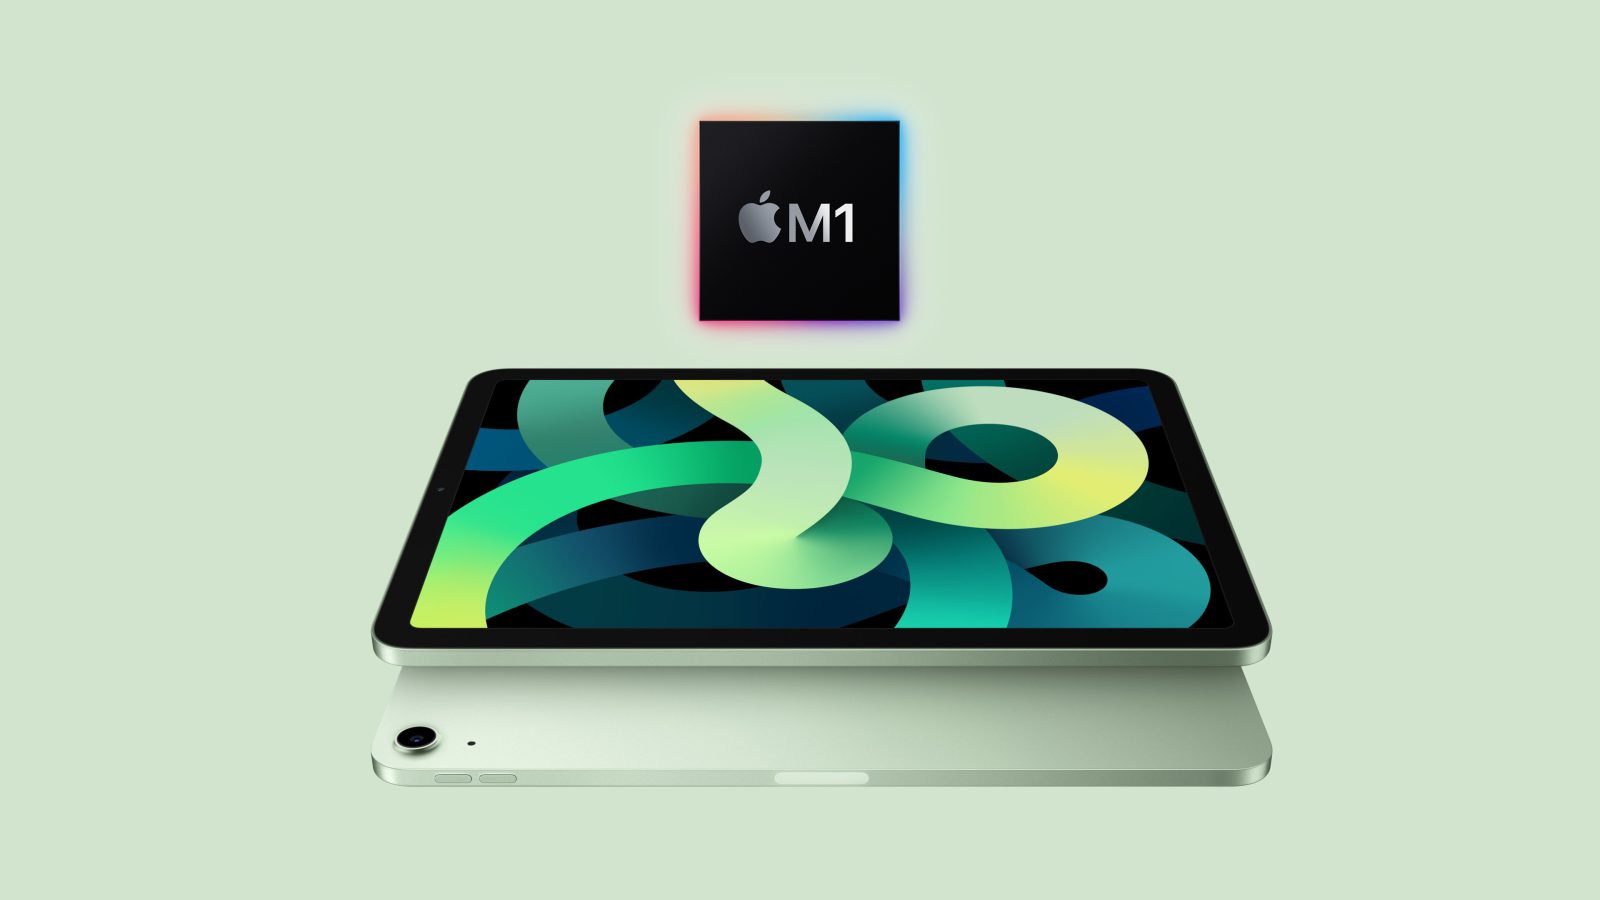 The new iPad Air, Now with M1